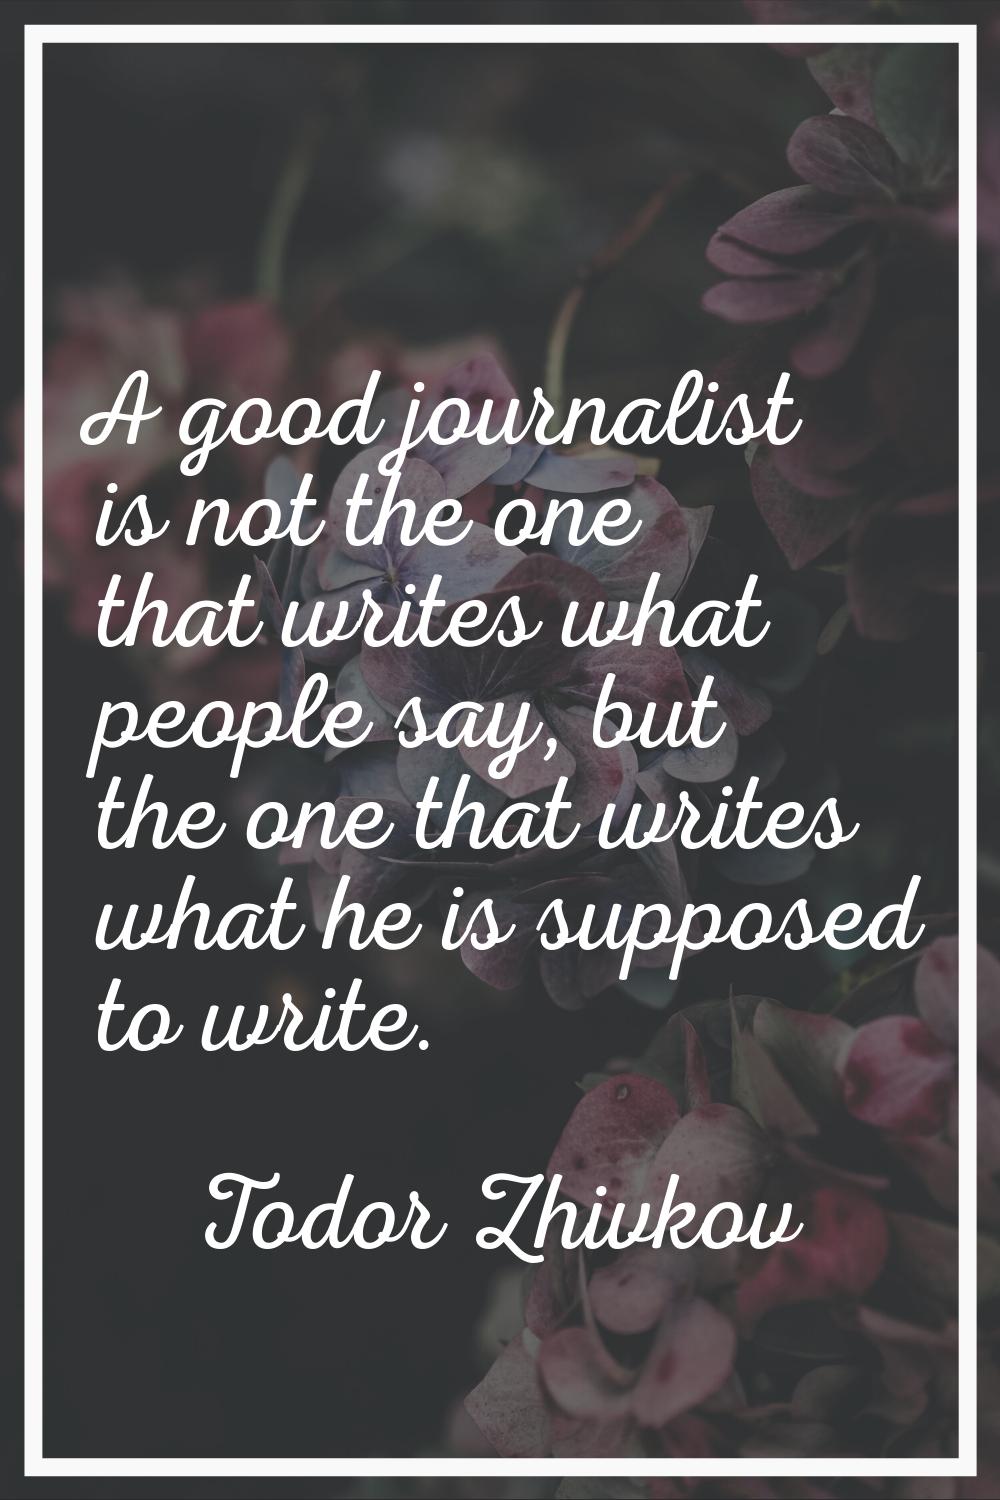 A good journalist is not the one that writes what people say, but the one that writes what he is su